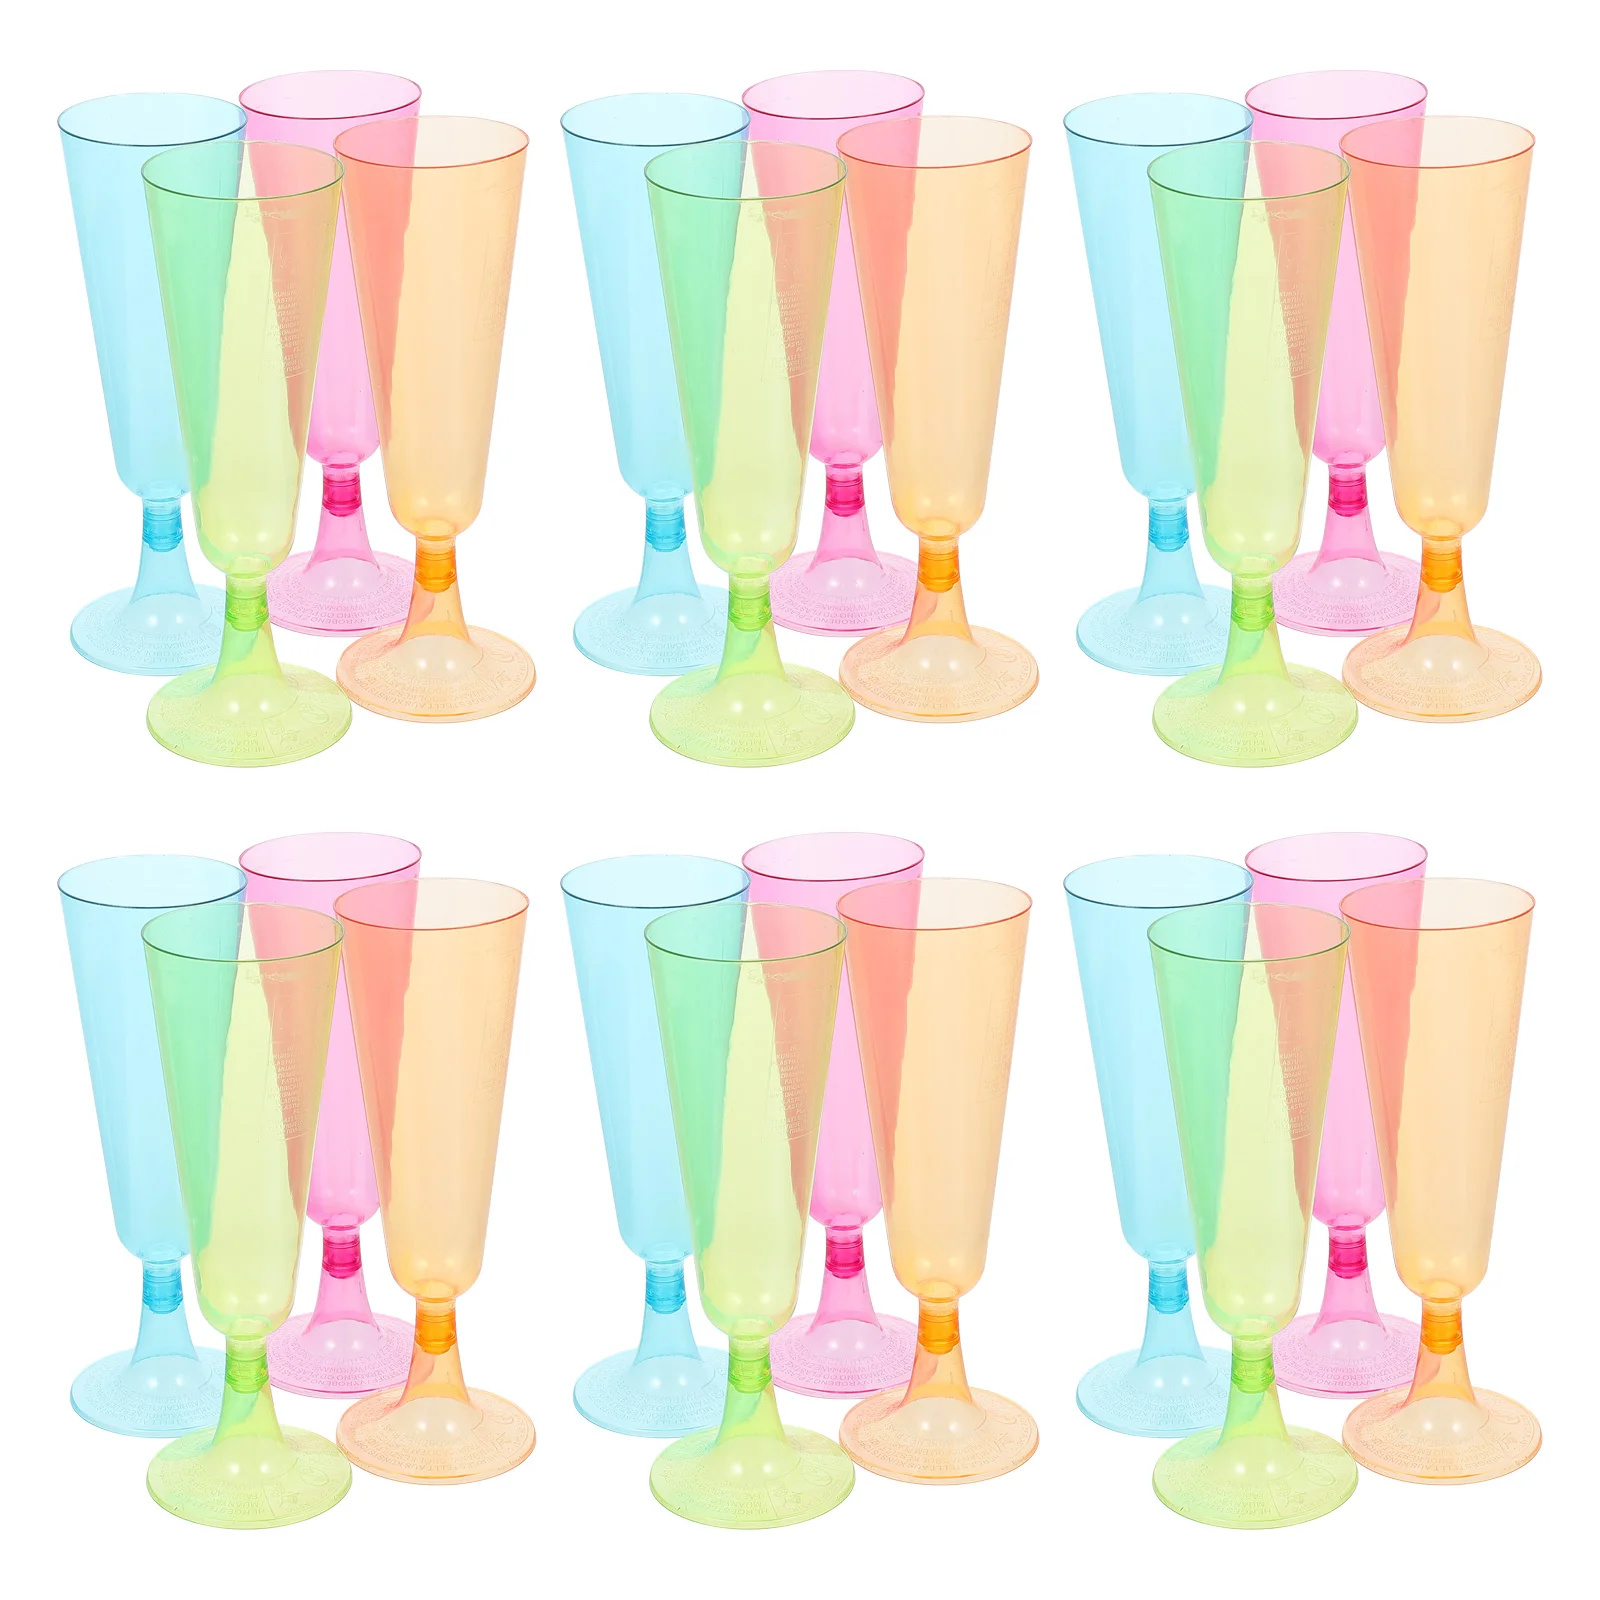 

Champagne Glasses Cups Cup Flutes Cocktail Flute Wedding Crystal Red Goblet Party Toasting Disposable Shatterproof Gourd Stem